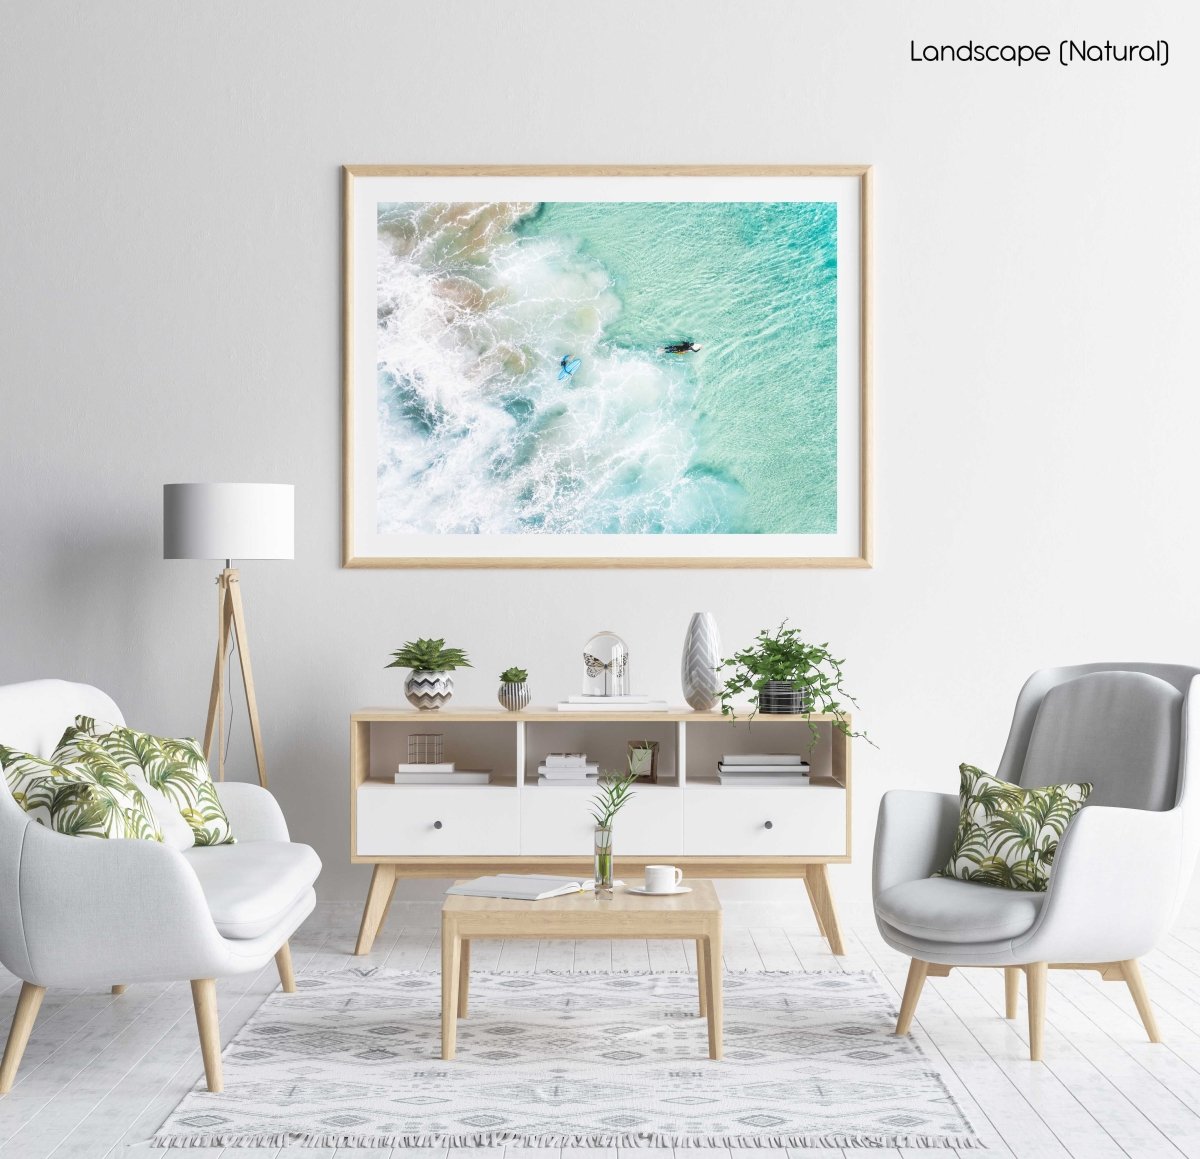 Aerial view of two surfers paddling in turquoise water and foam in a natural fine art frame